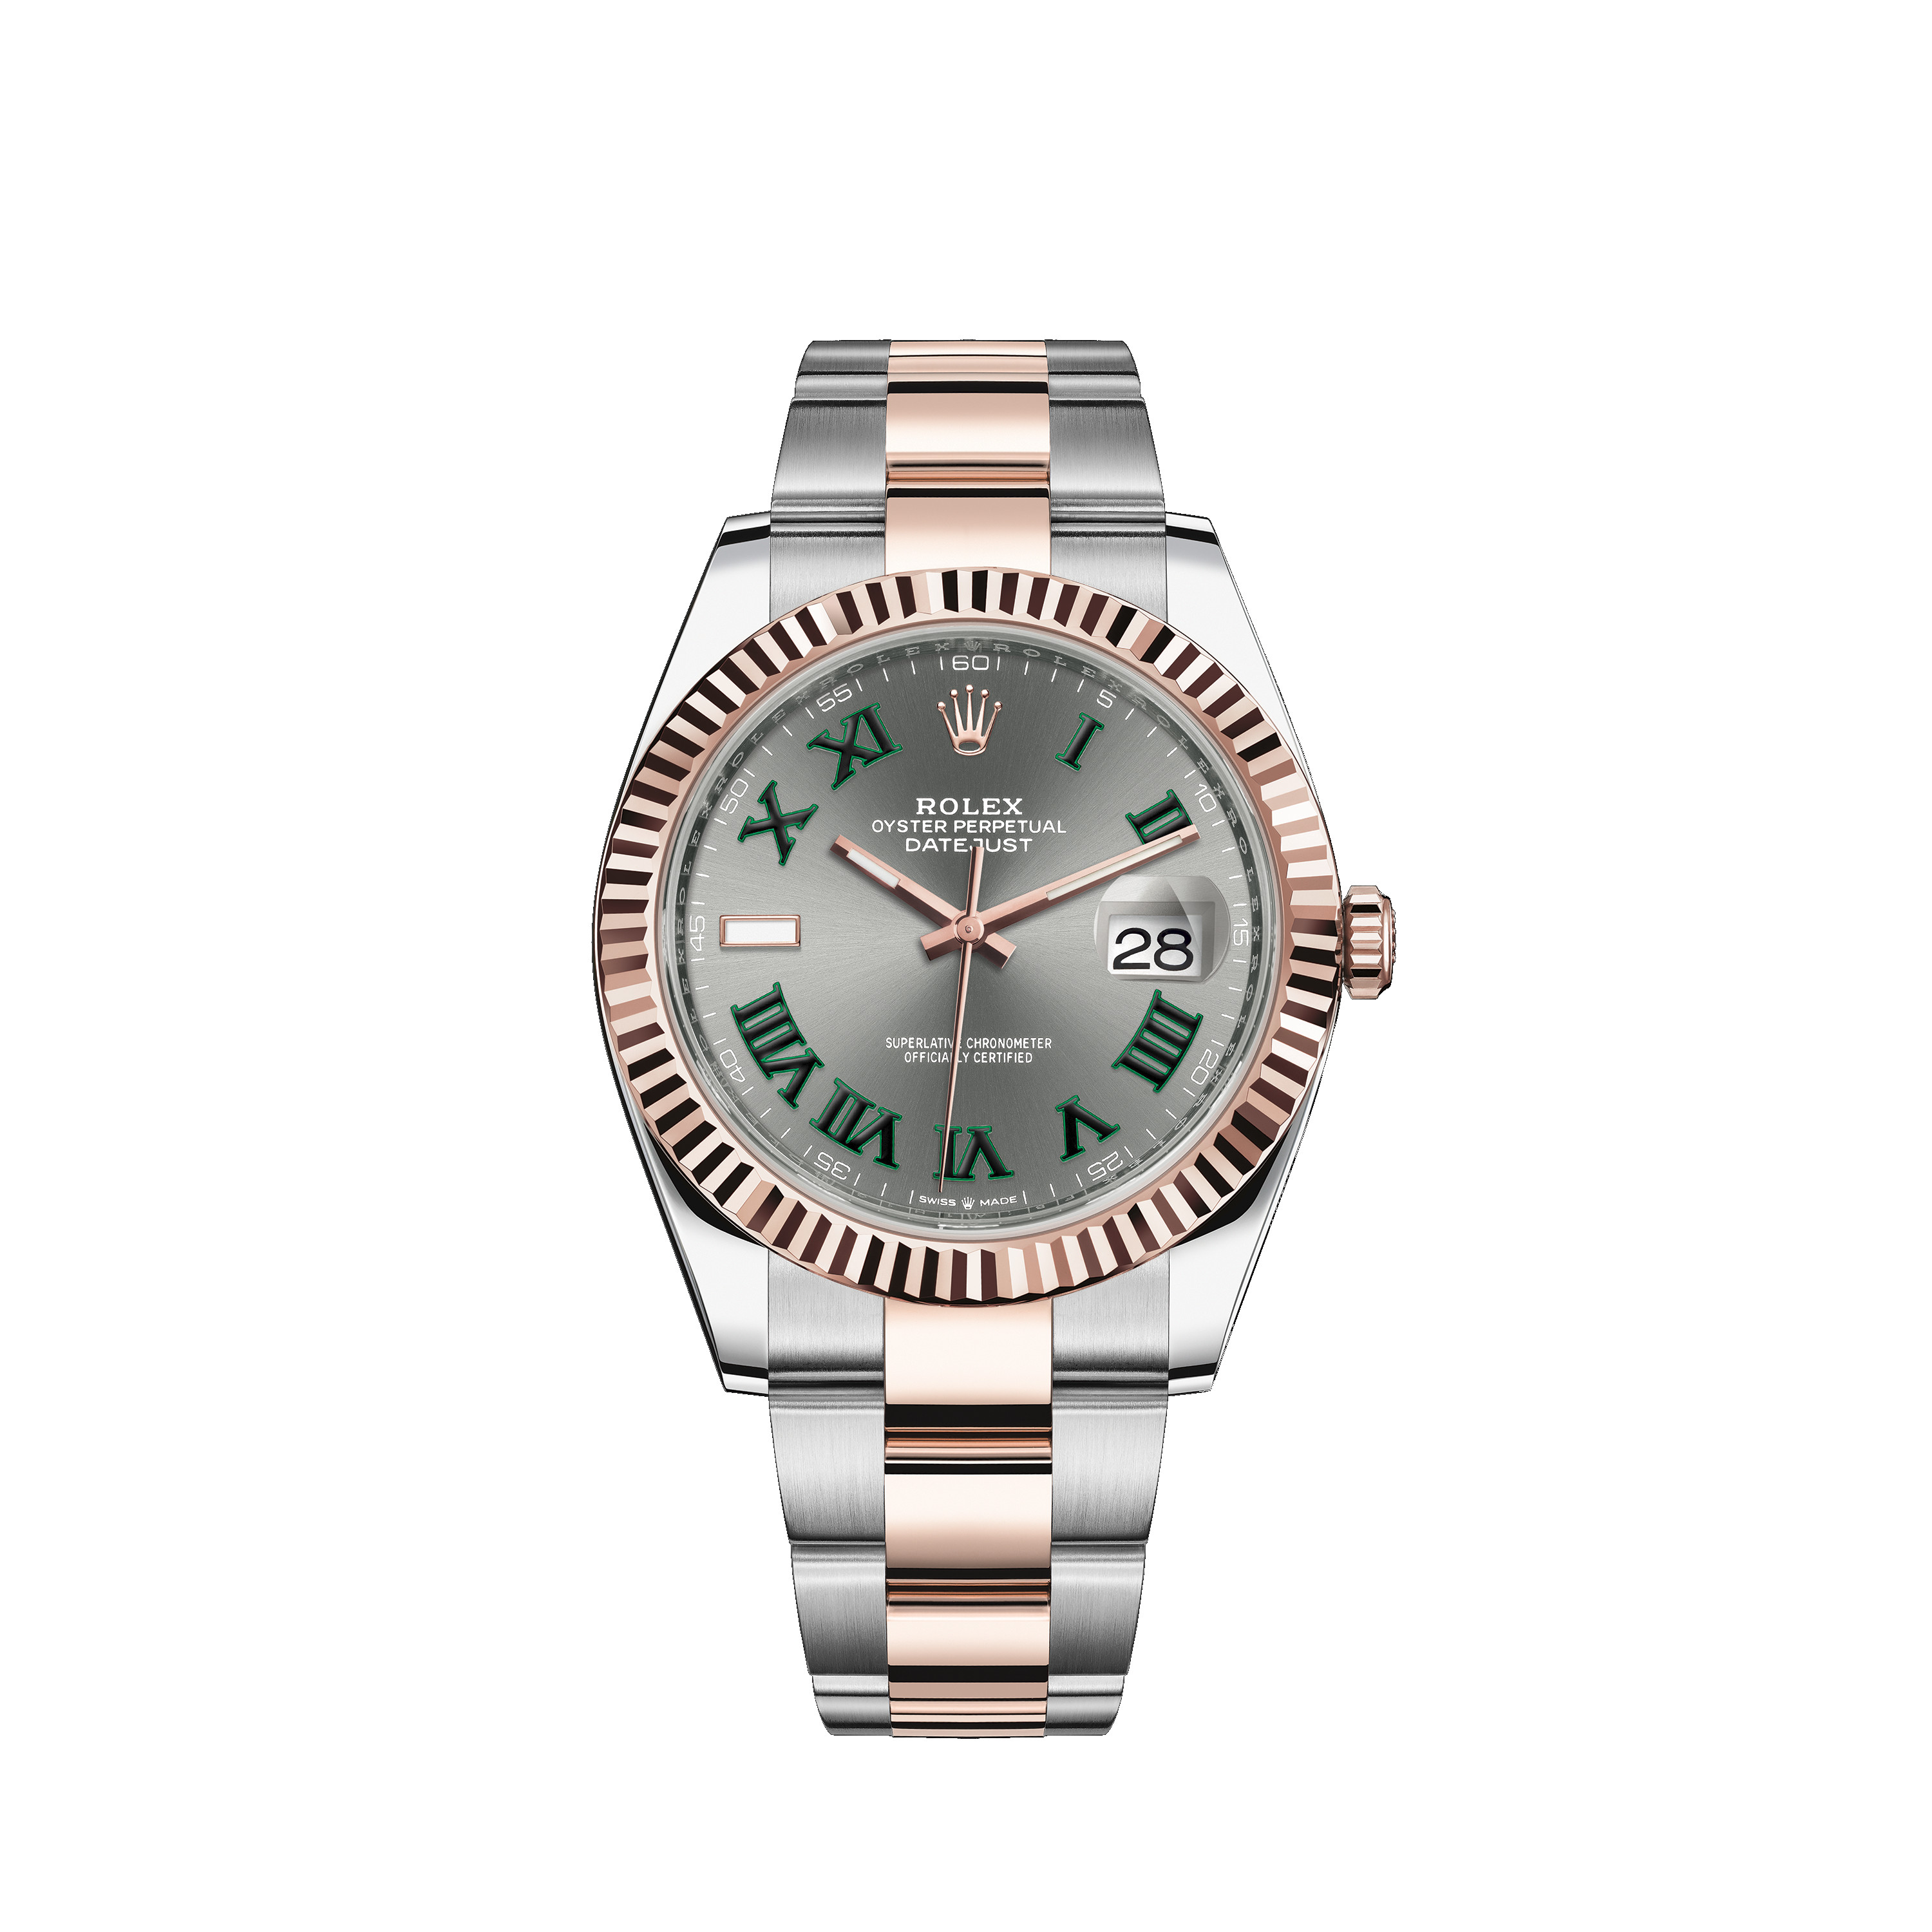 Datejust 41 126331 Rose Gold & Stainless Steel Watch (Slate)